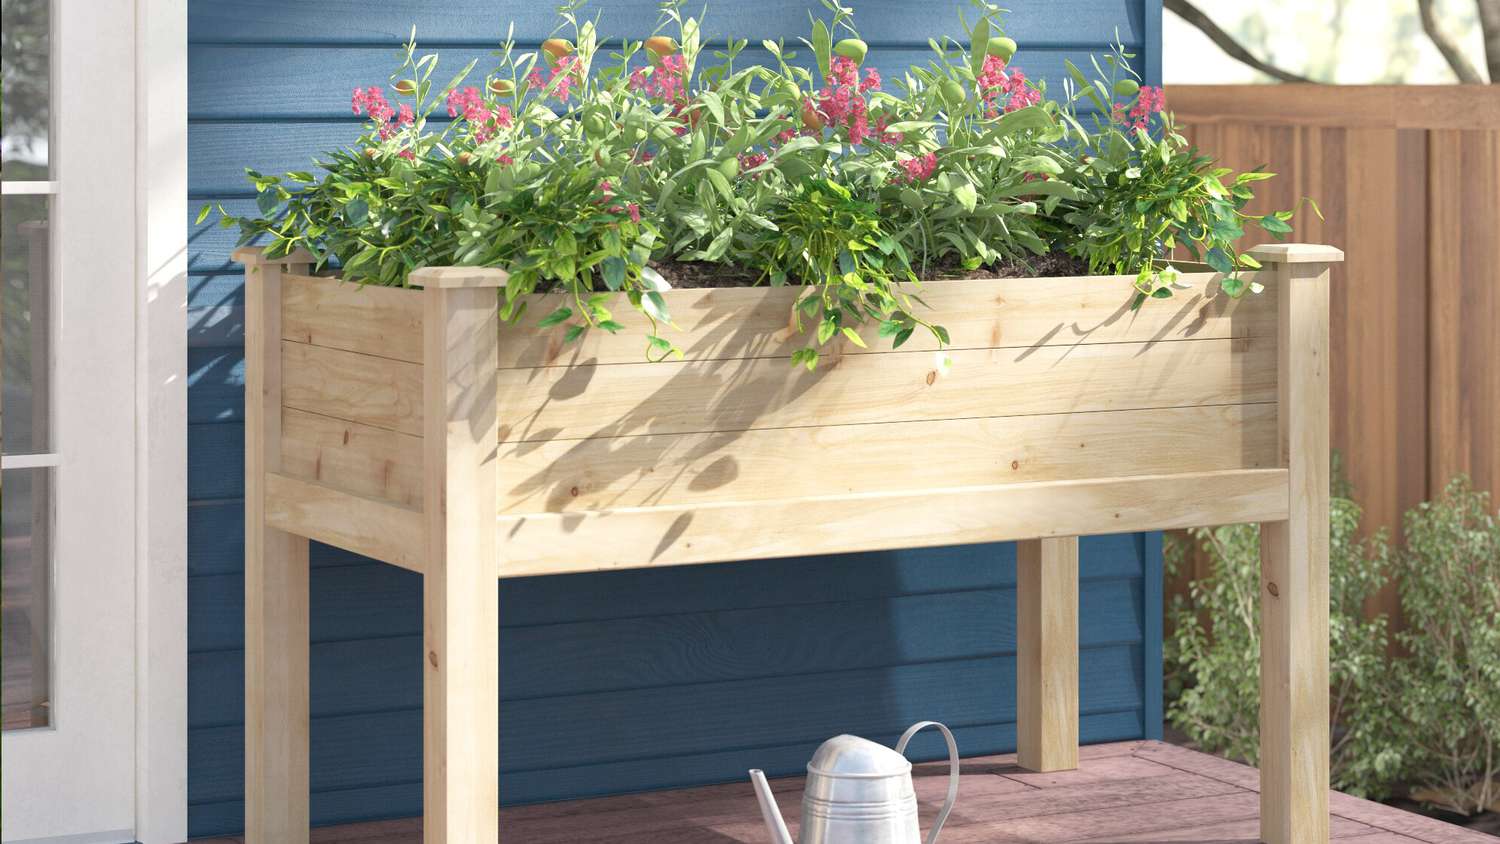 The 10 Best Raised Garden Beds in 2021, According to Reviews | Real Simple